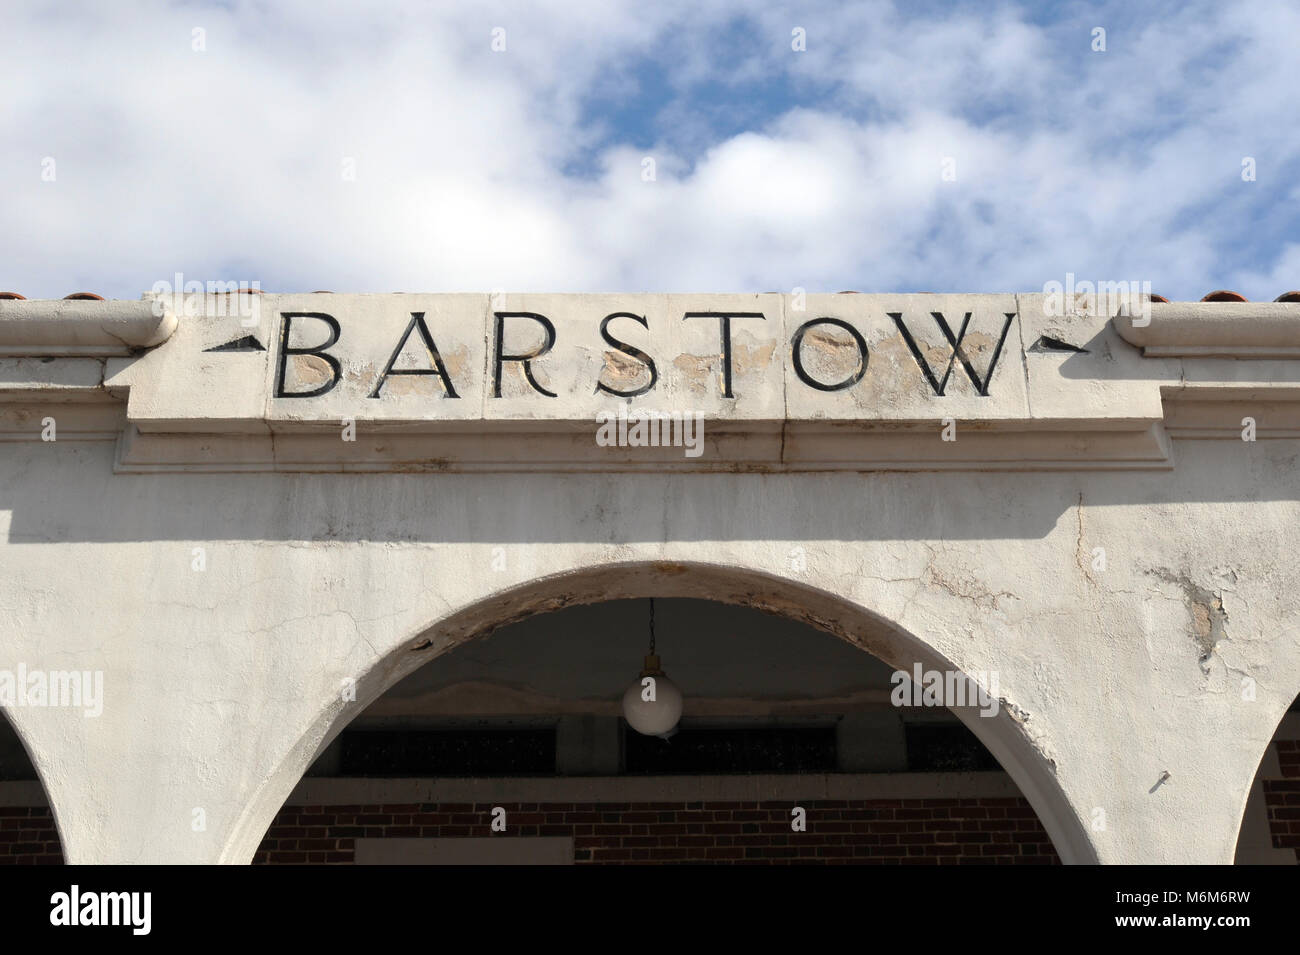 Detail of the historic Barstow, California train station, a former Harvey House depot-hotel built in 1911 and called the Casa del Desierto. Stock Photo